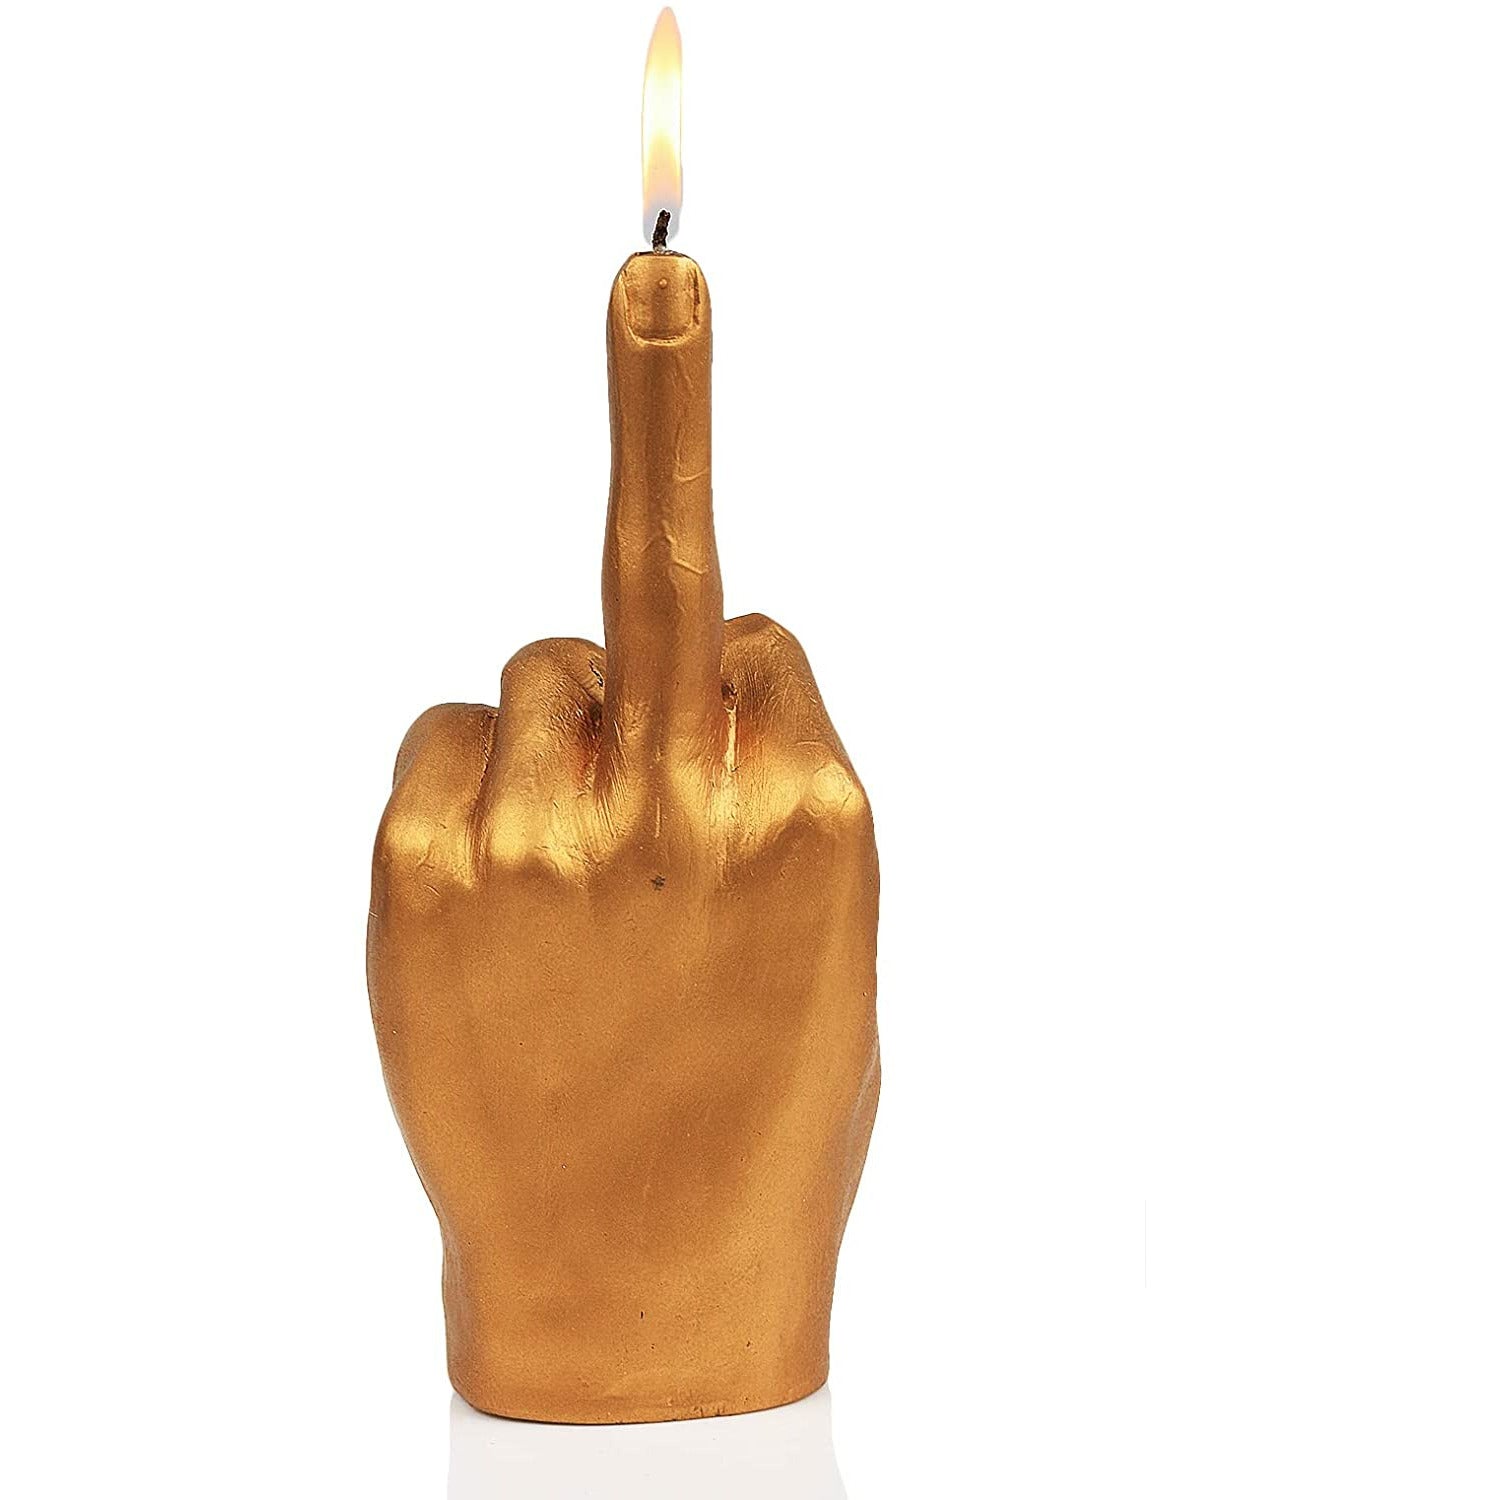 Middle Finger Candle – Shut Up and Take my MONEY